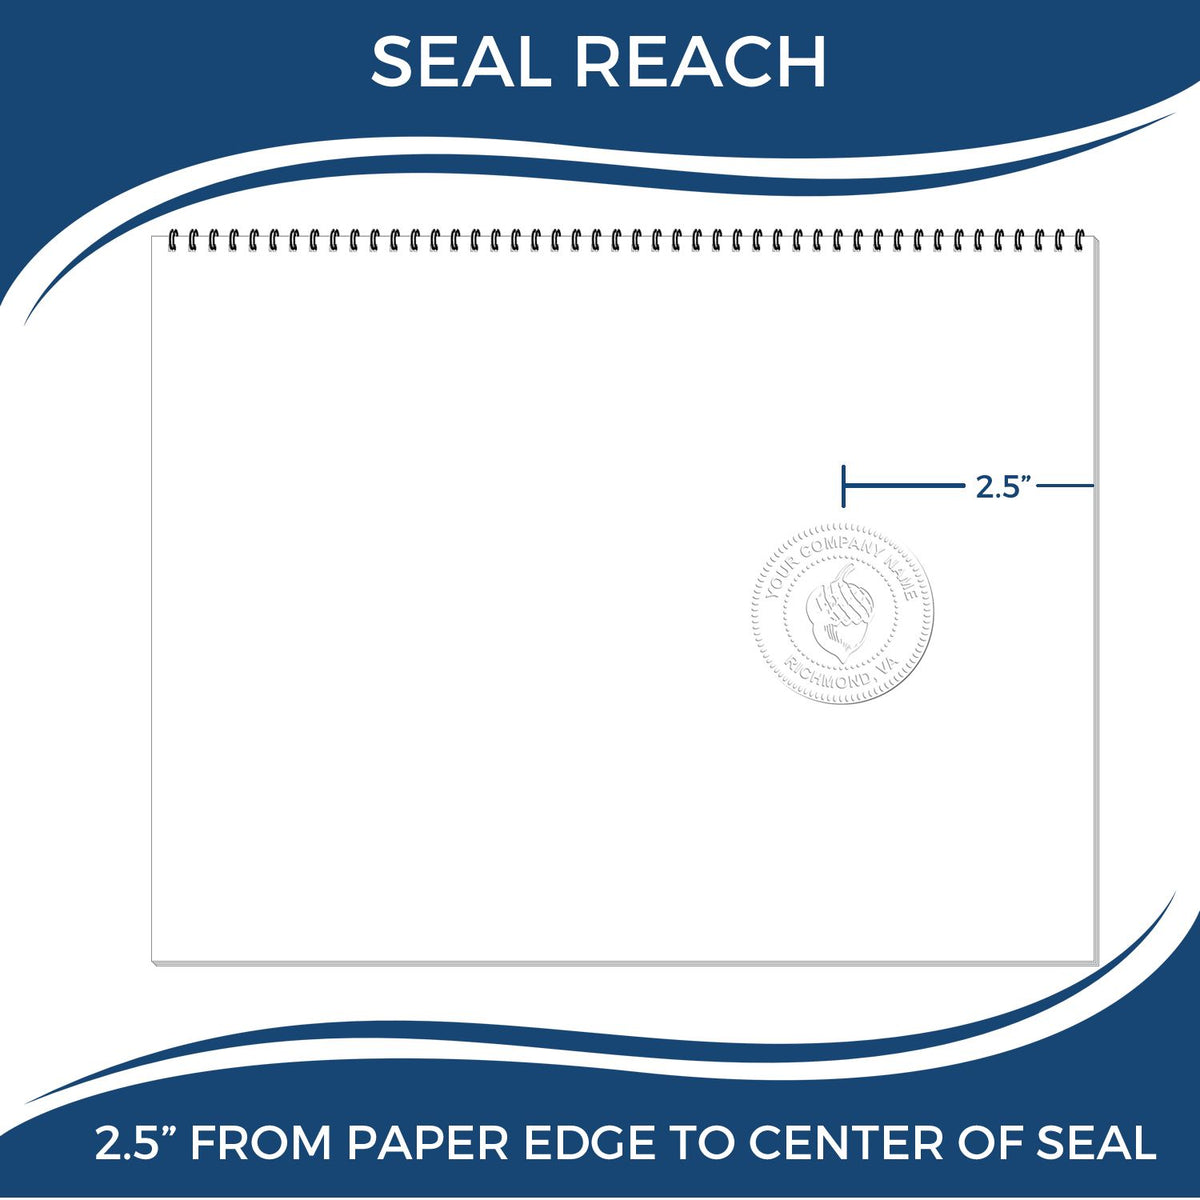 An infographic showing the seal reach which is represented by a ruler and a miniature seal image of the Heavy Duty Cast Iron Georgia Architect Embosser